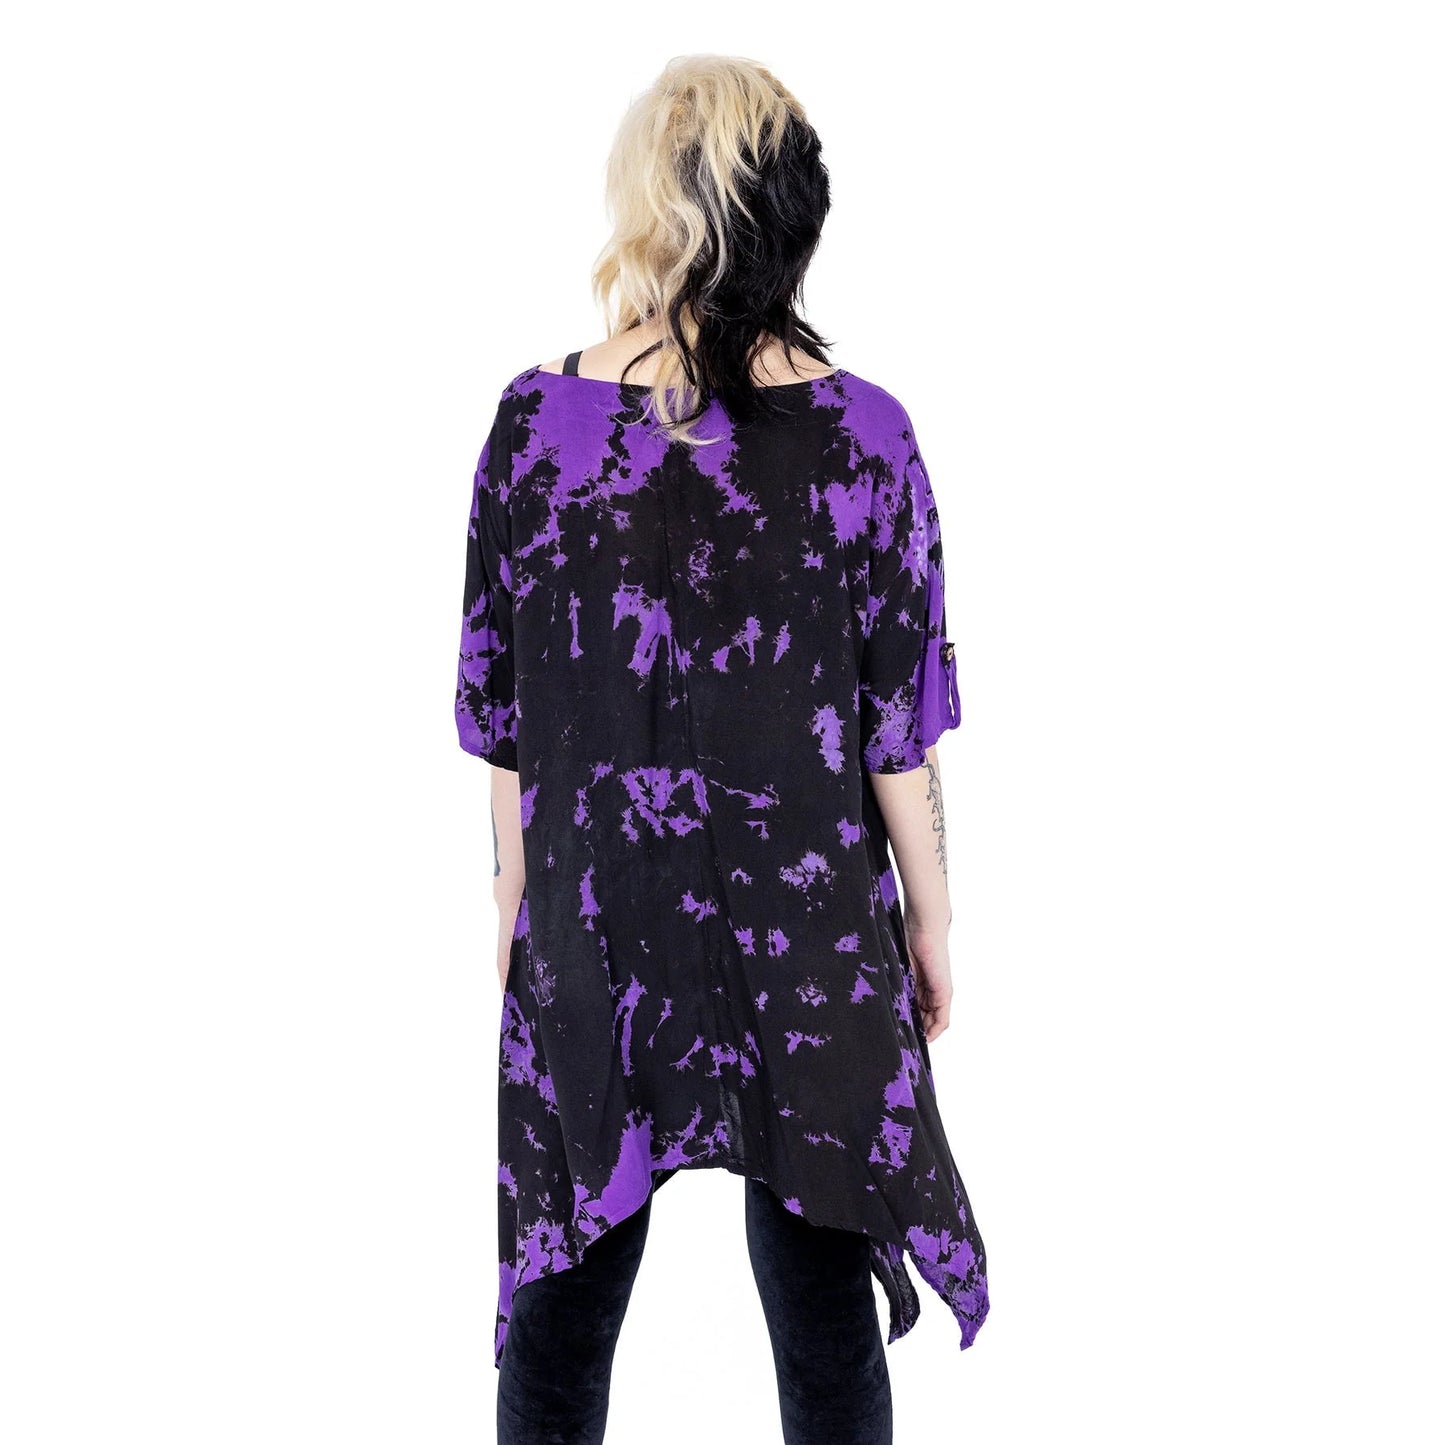 Innocent Lifestyle Purple Tie Dye Jacinta Top with Pockets - Kate's Clothing